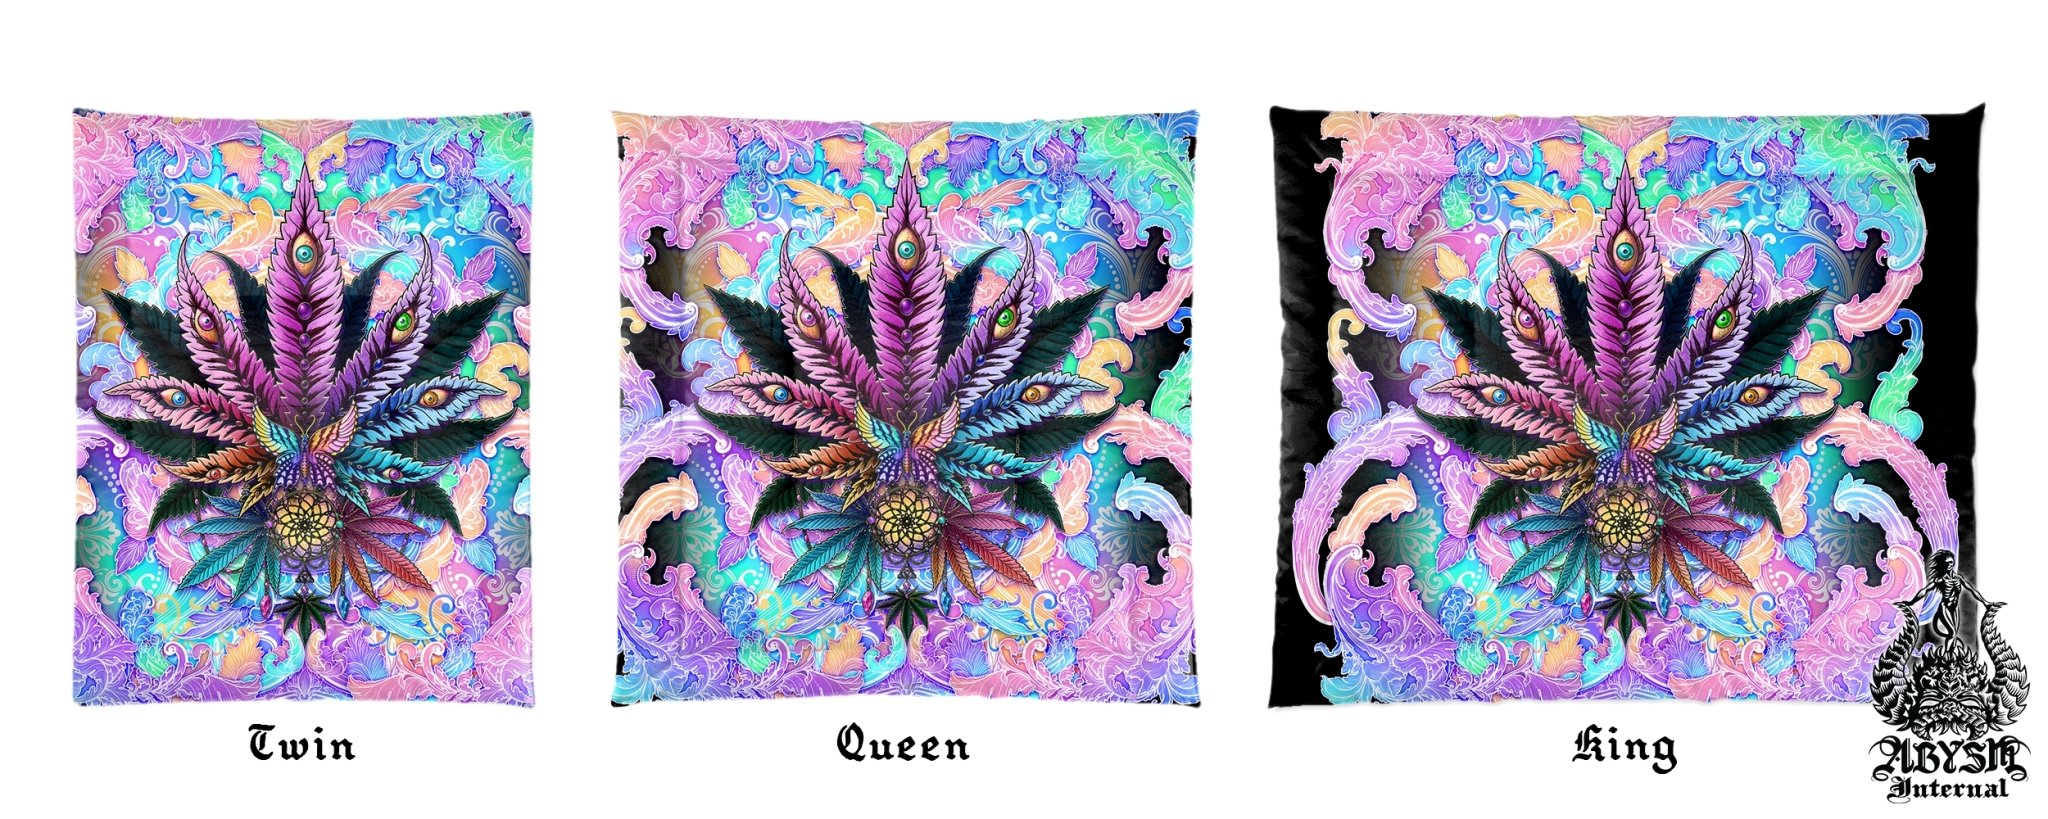 Weed Bedding Set, Comforter and Duvet, Aesthetic Bed Cover, Psychedelic Girl Bedroom Decor, King, Queen and Twin Size, 420 Cannabis Room Art - Marijuana Pastel Black - Abysm Internal